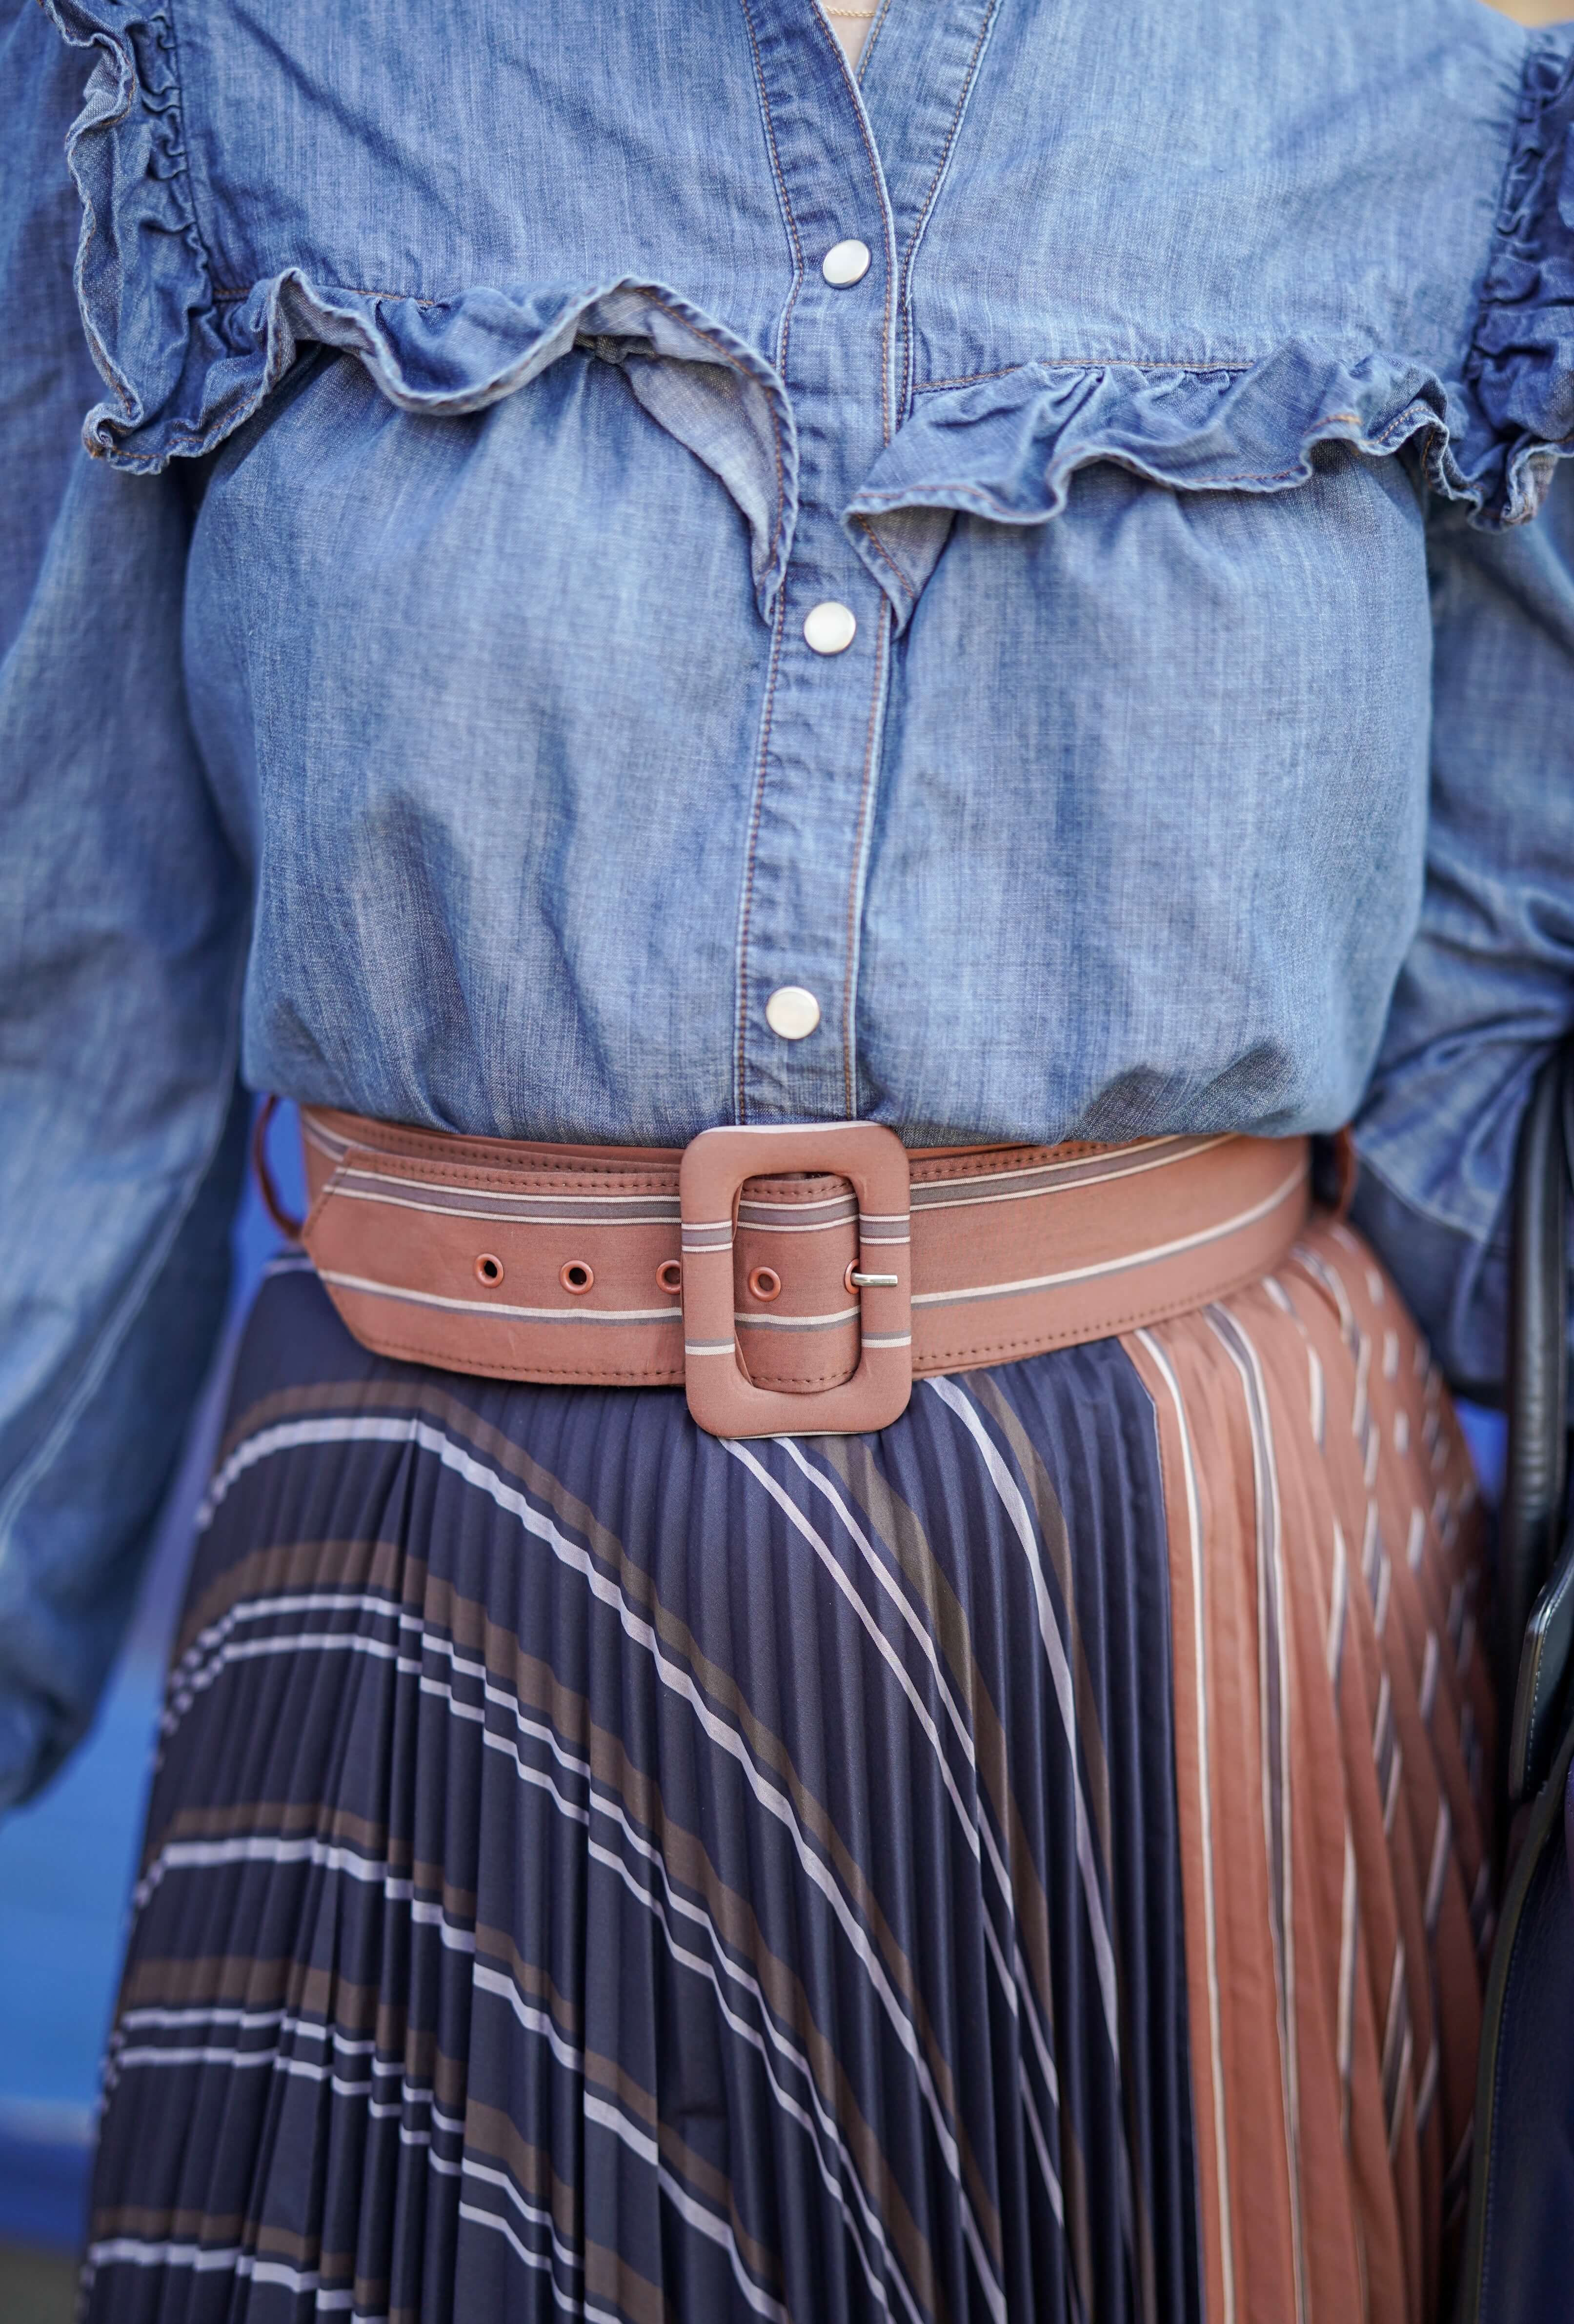 Anthropologie Pleated Skirt Veronica Beard Denim Shirt Coclico Booties Celine Luggage Bag Outfit by Modnitsa Styling